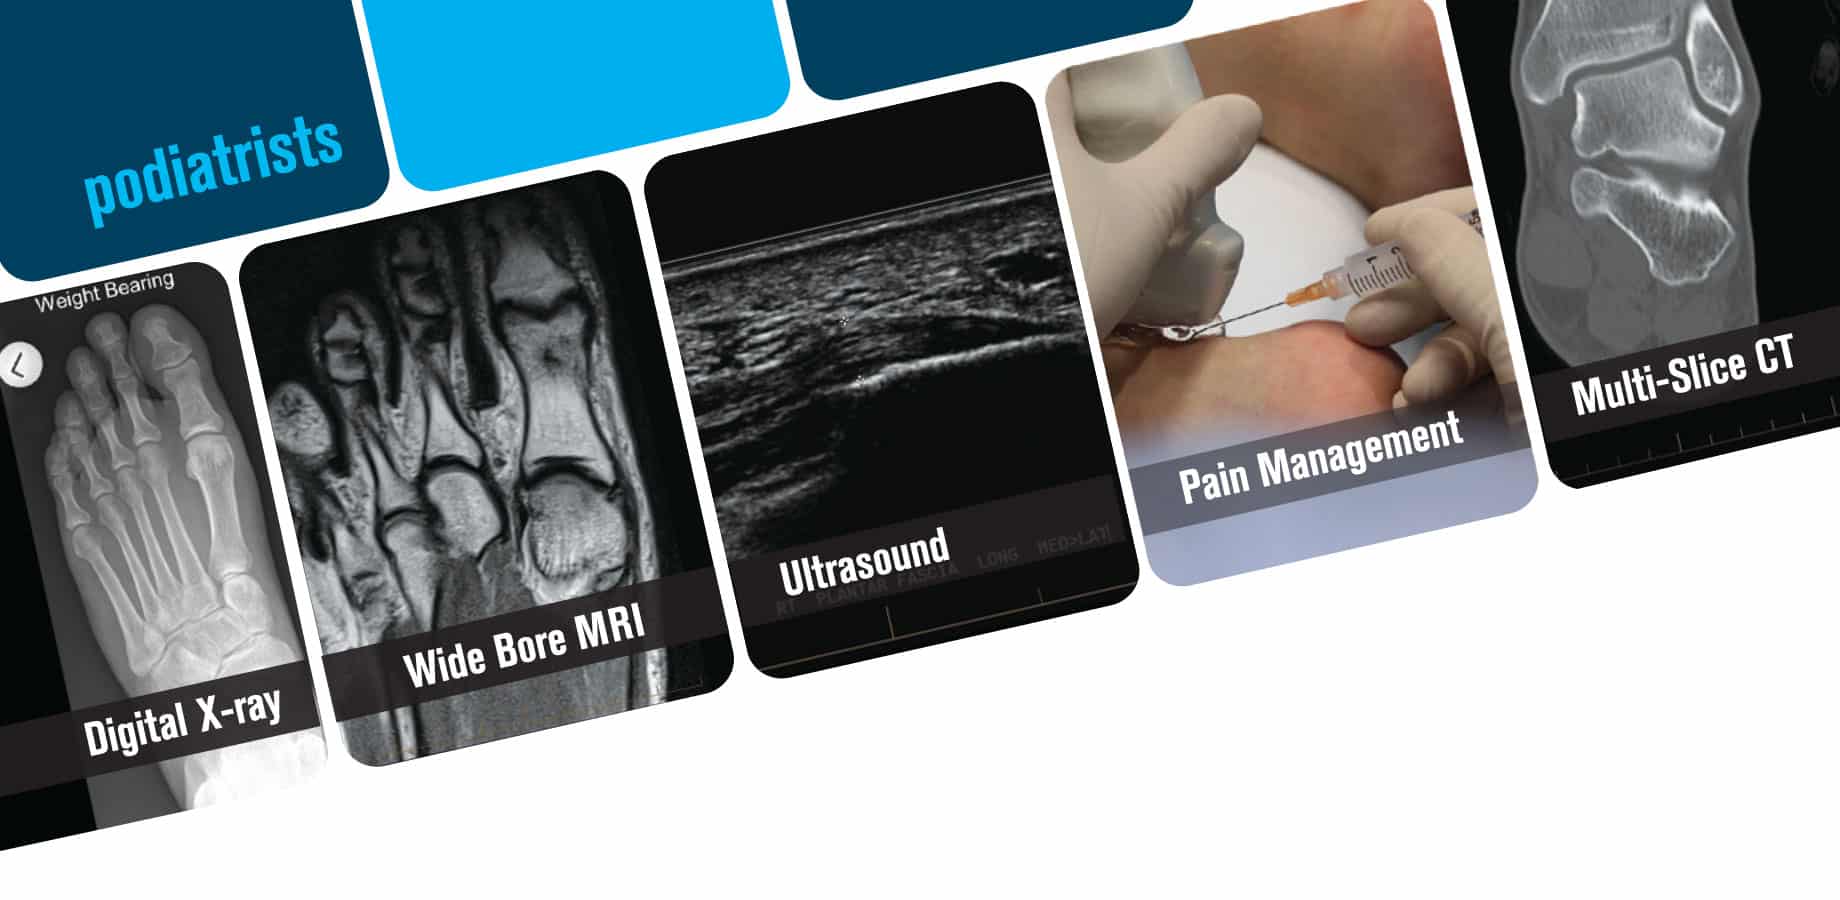 sample images of digital x-ray, MRI, ultrasound, pain management, and multi-slice CT